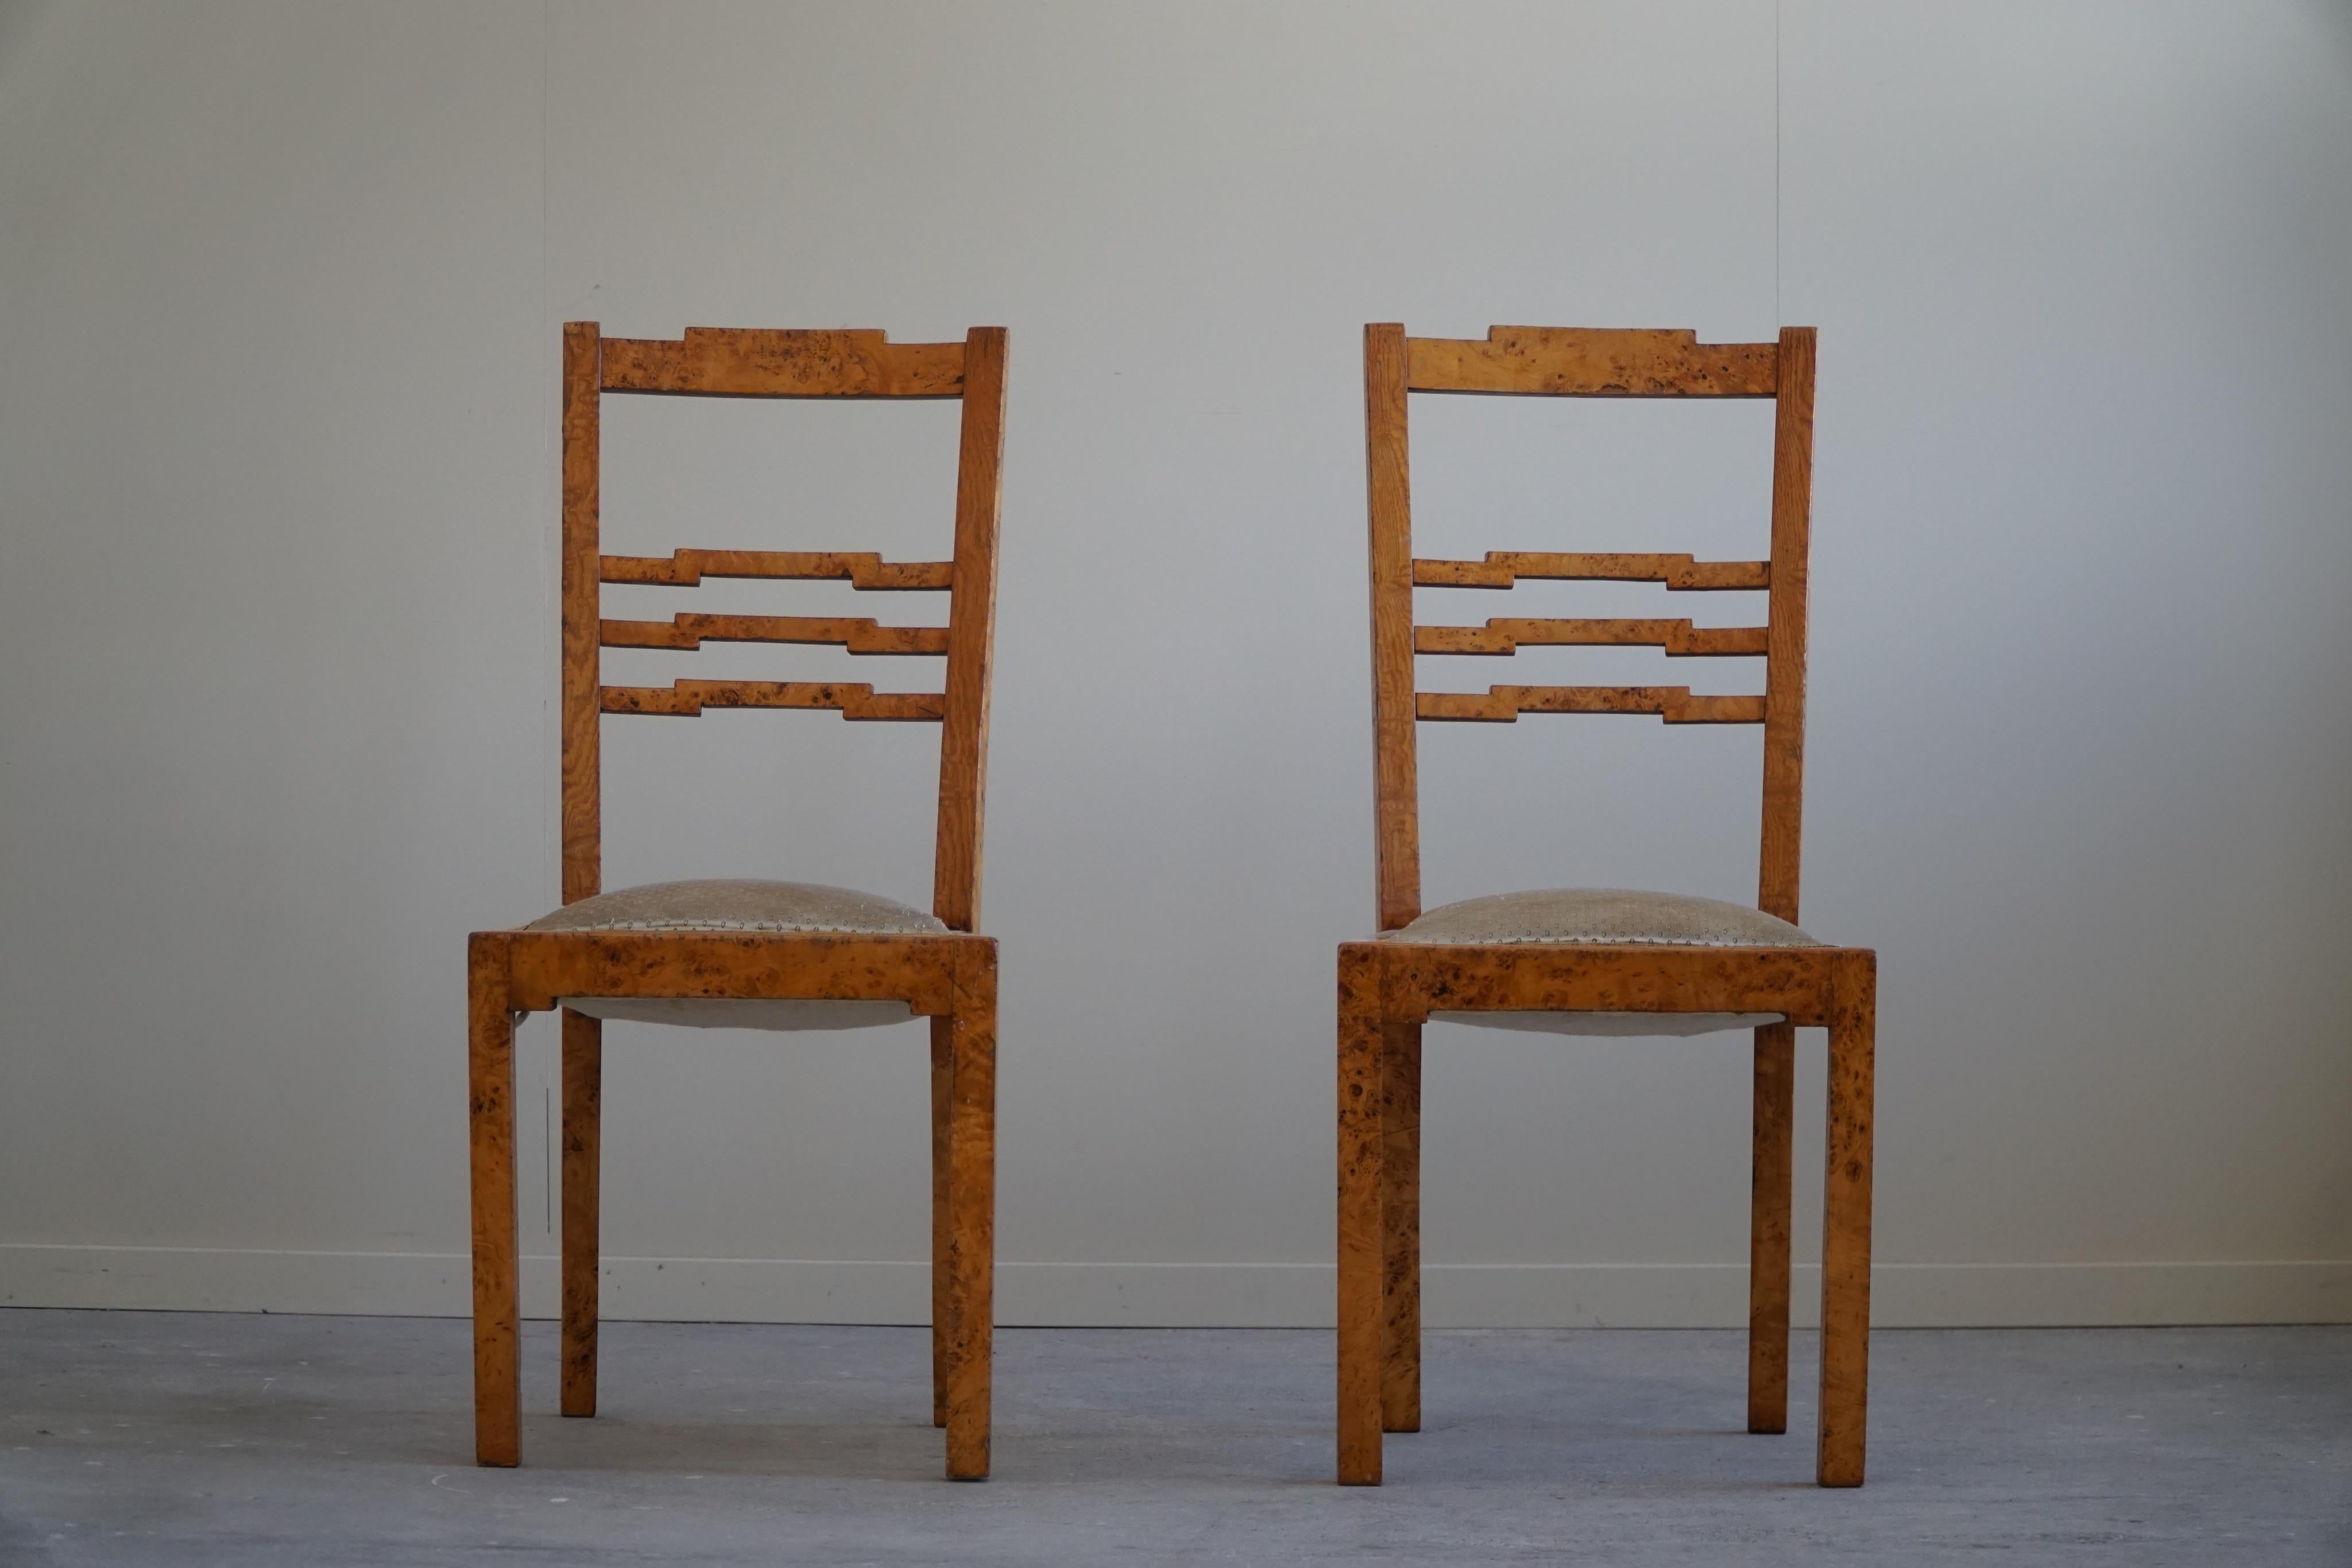 A Pair of Swedish Art Deco Dining Room Chairs in Birch, 1920s In Fair Condition For Sale In Odense, DK